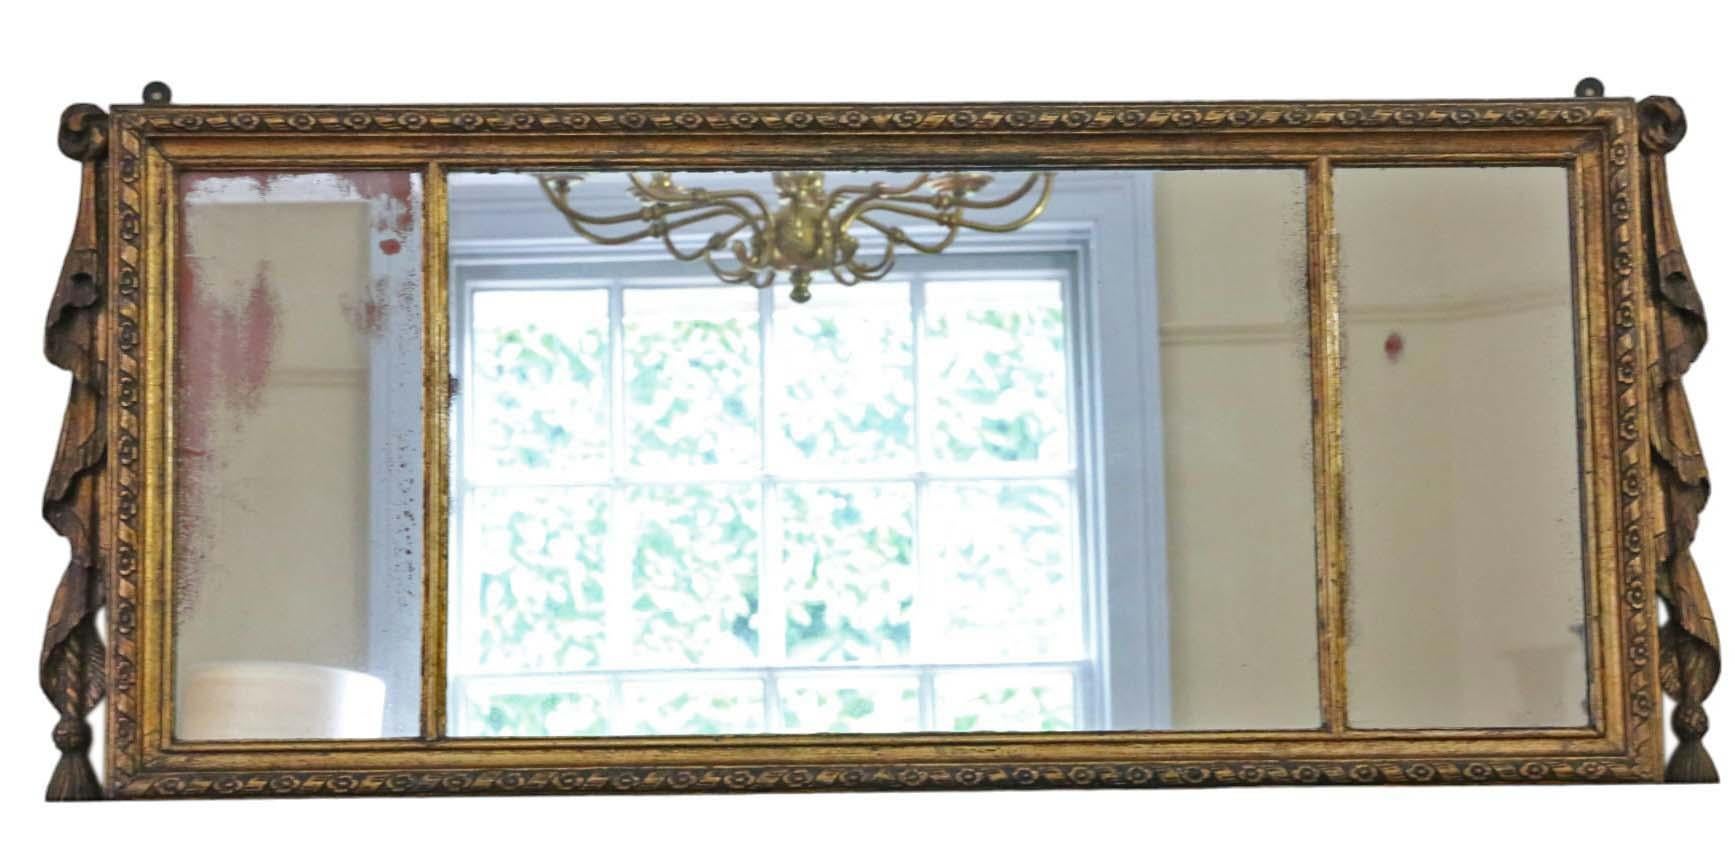 Antique large gilt overmantle wall mirror from the 19th Century, featuring a fine quality decorative swag design.

This mirror captivates with its simple yet striking design, lending character to any suitable space. The frame is solid, devoid of